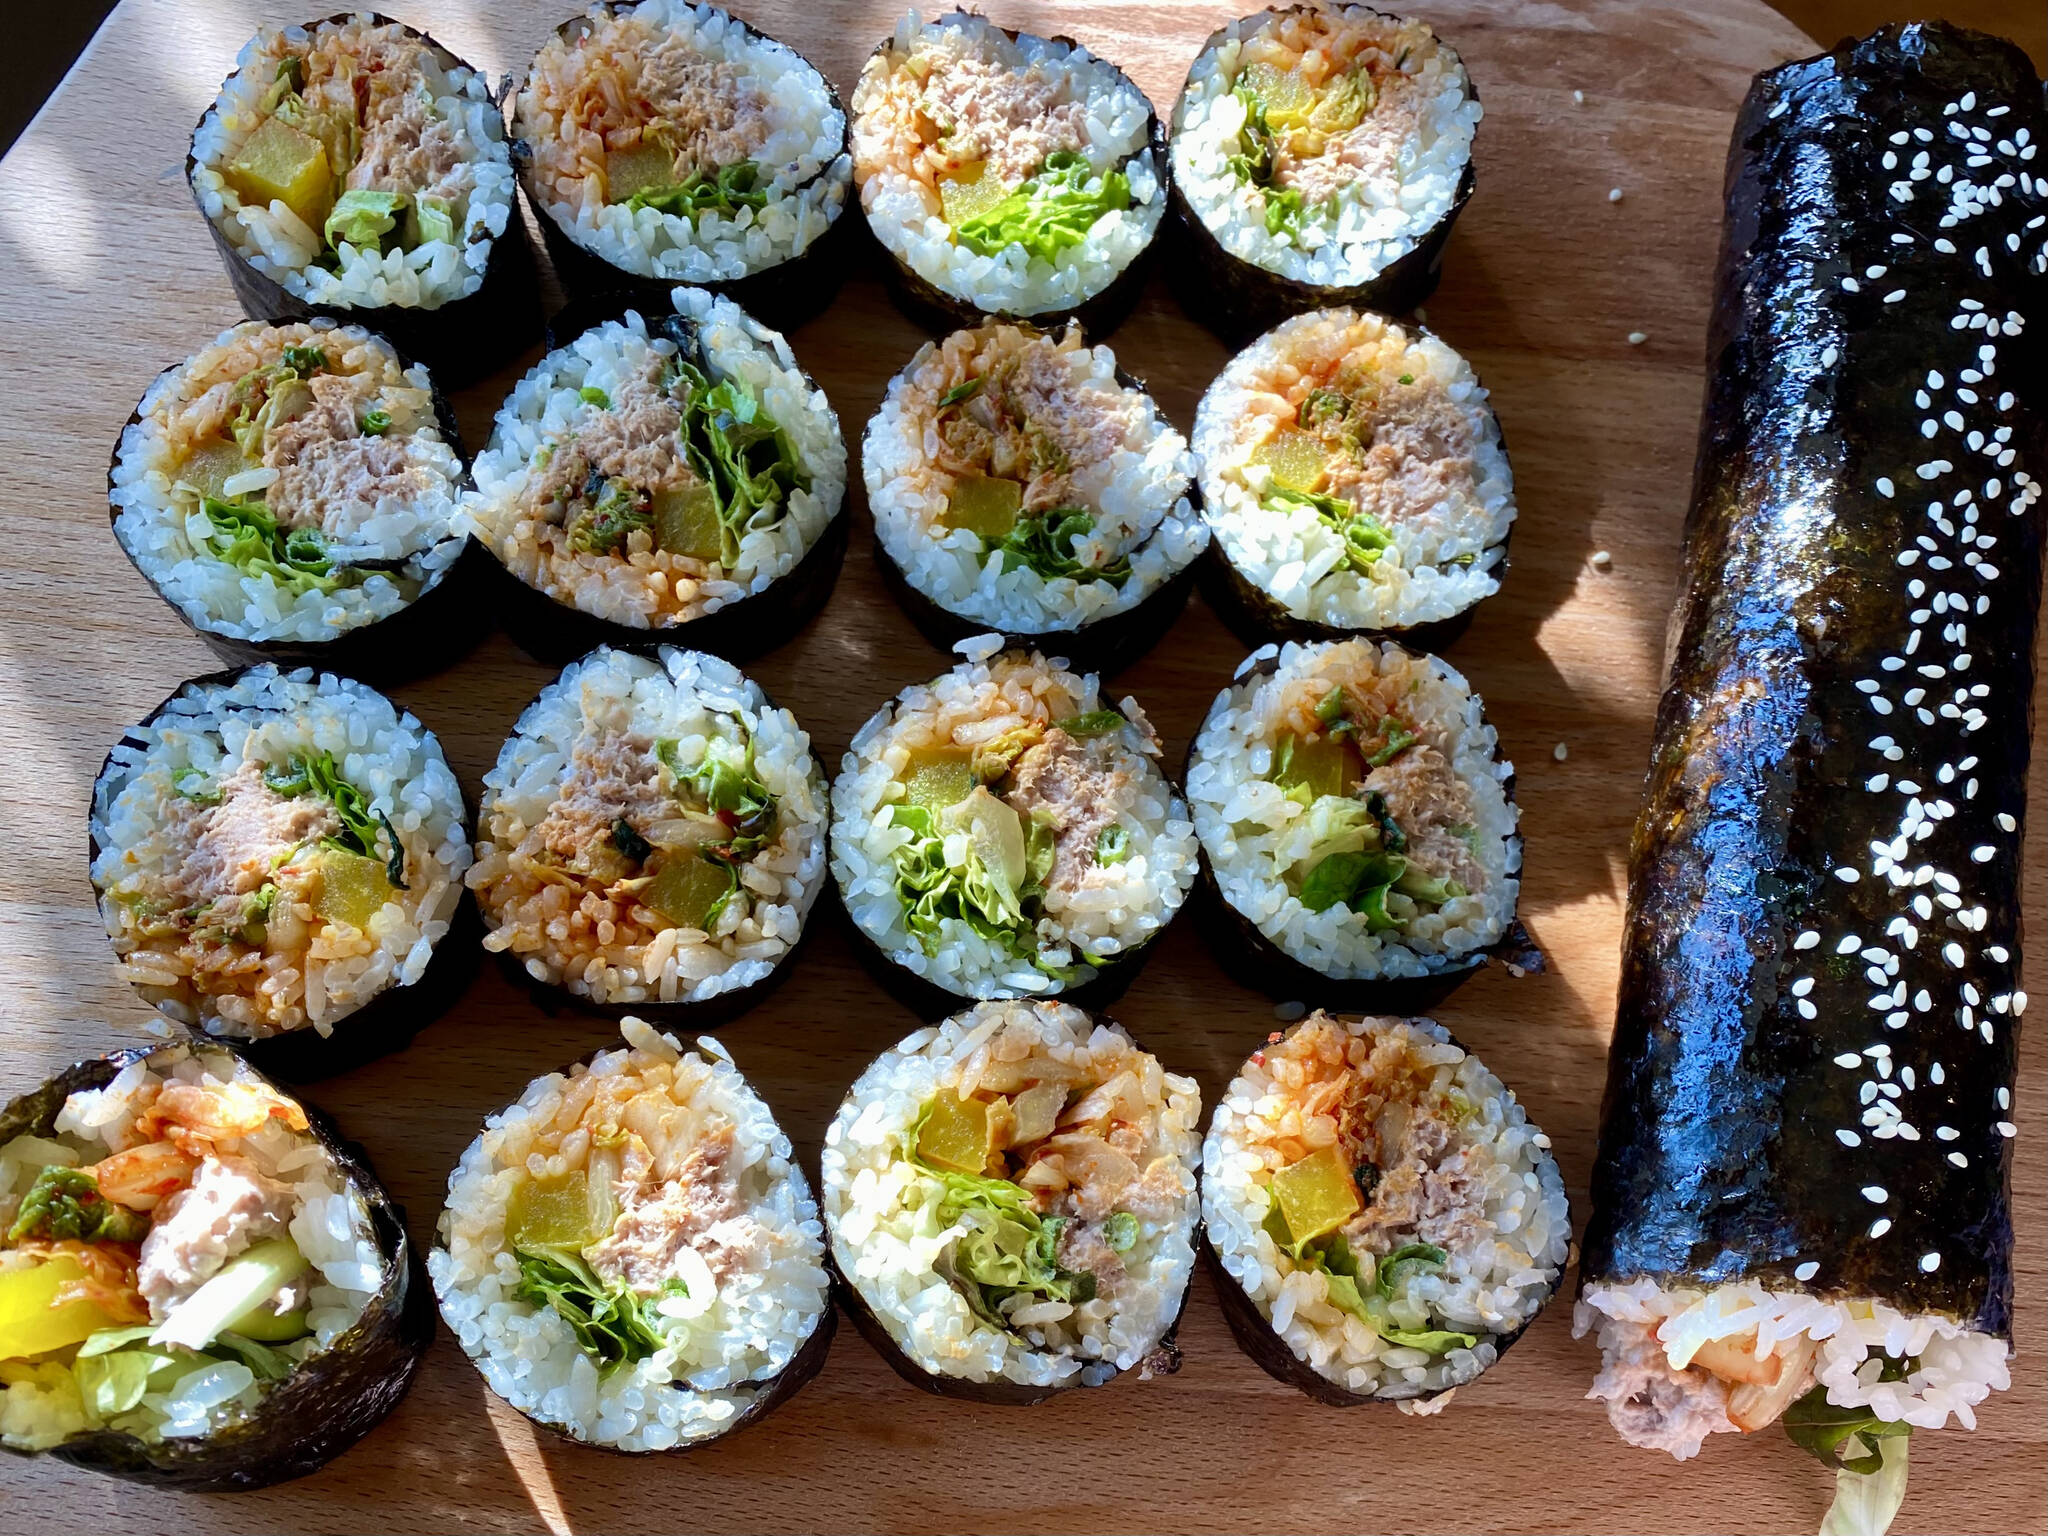 Korean kimbap with tuna, kimchi, lettuce and carrots makes a perfect to-go meal. (Photo by Tressa Dale/Peninsula Clarion)